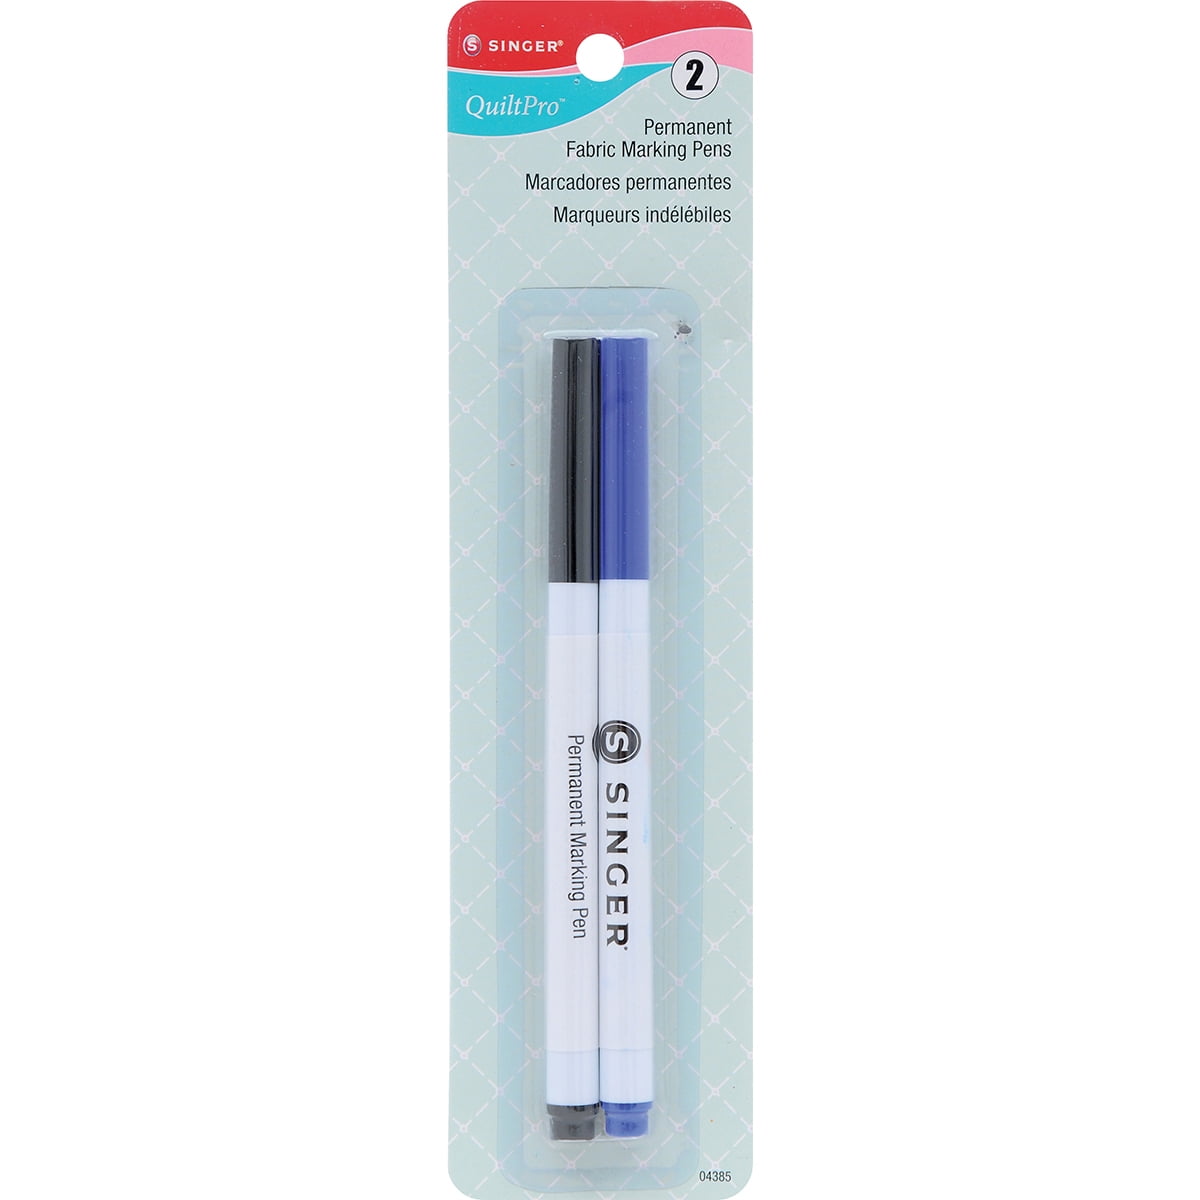 SINGER Measure & Mark - 120 inch Tape Measure and Fabric Pencil Set, Blue  and White Pencils